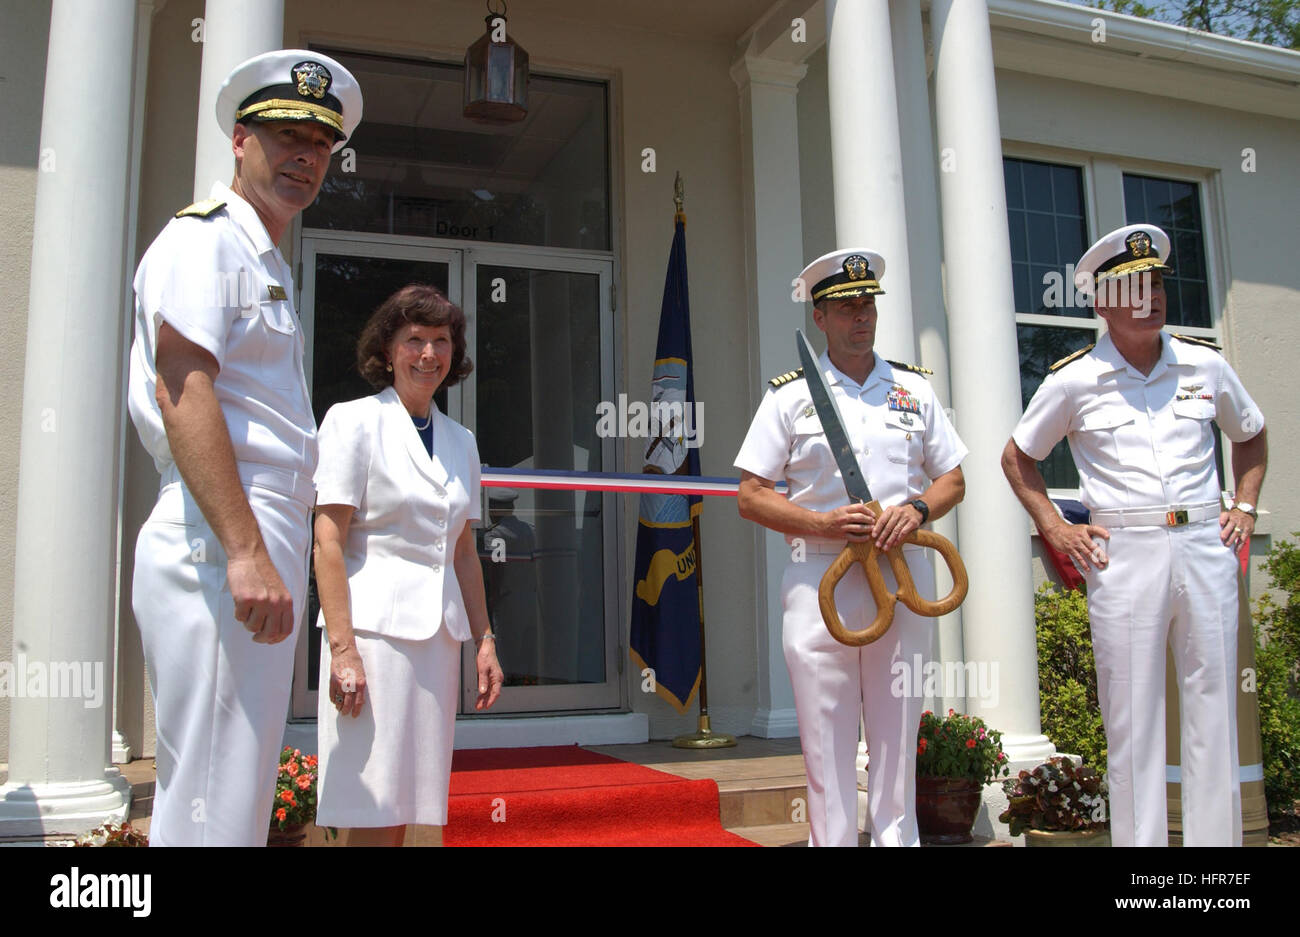 060608-N-3218H-122 Yorktown, Va. (June 8, 2006) - Commanding Officer Naval Weapons Station Yorktown, Capt. Gerard O'Regan, prepares to cut the ribbon for the official opening of the Naval Munitions Command as, Rear Adm. Ray Berube, Dr. Frances Holt, and Adm. John Nathman stand by. The Naval Munitions Command will align all current ashore ordnance support operations in the United States and Asia into one worldwide unit to consolidate resource requirements, standardize policies and streamline procedures for a more responsive, flexible and efficient fleet ordnance support structure. U.S. Navy pho Stock Photo